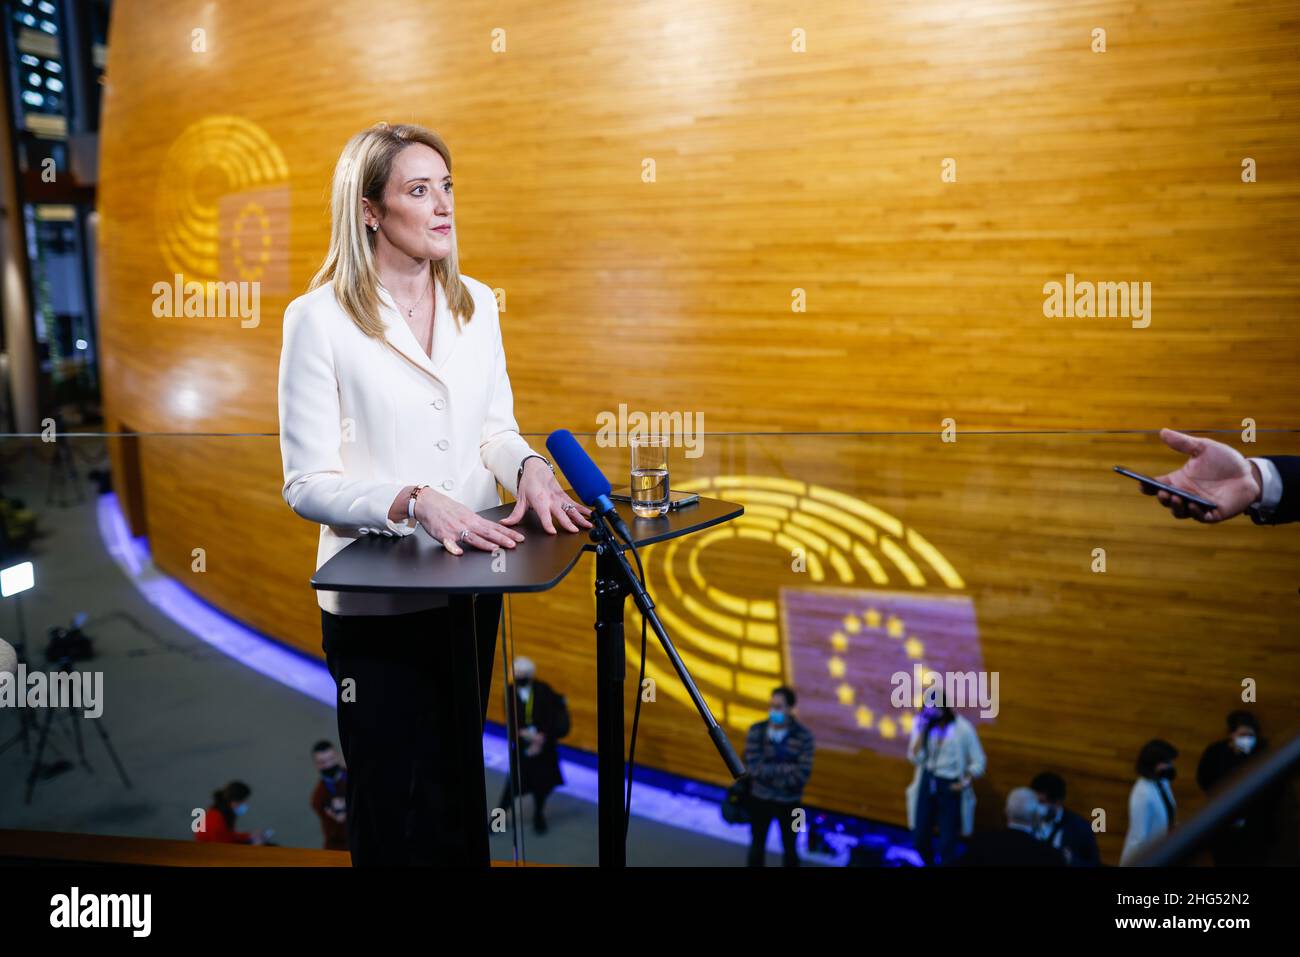 18 January 2022, France, Straßburg: Roberta Metsola (Partit Nazzjonalista), EPP Group, stands and speaks during an interview in the European Parliament building after her election as President of the European Parliament. Metsola was considered the favorite for the office and was already able to win in the first round of voting. Photo: Philipp von Ditfurth/dpa Stock Photo